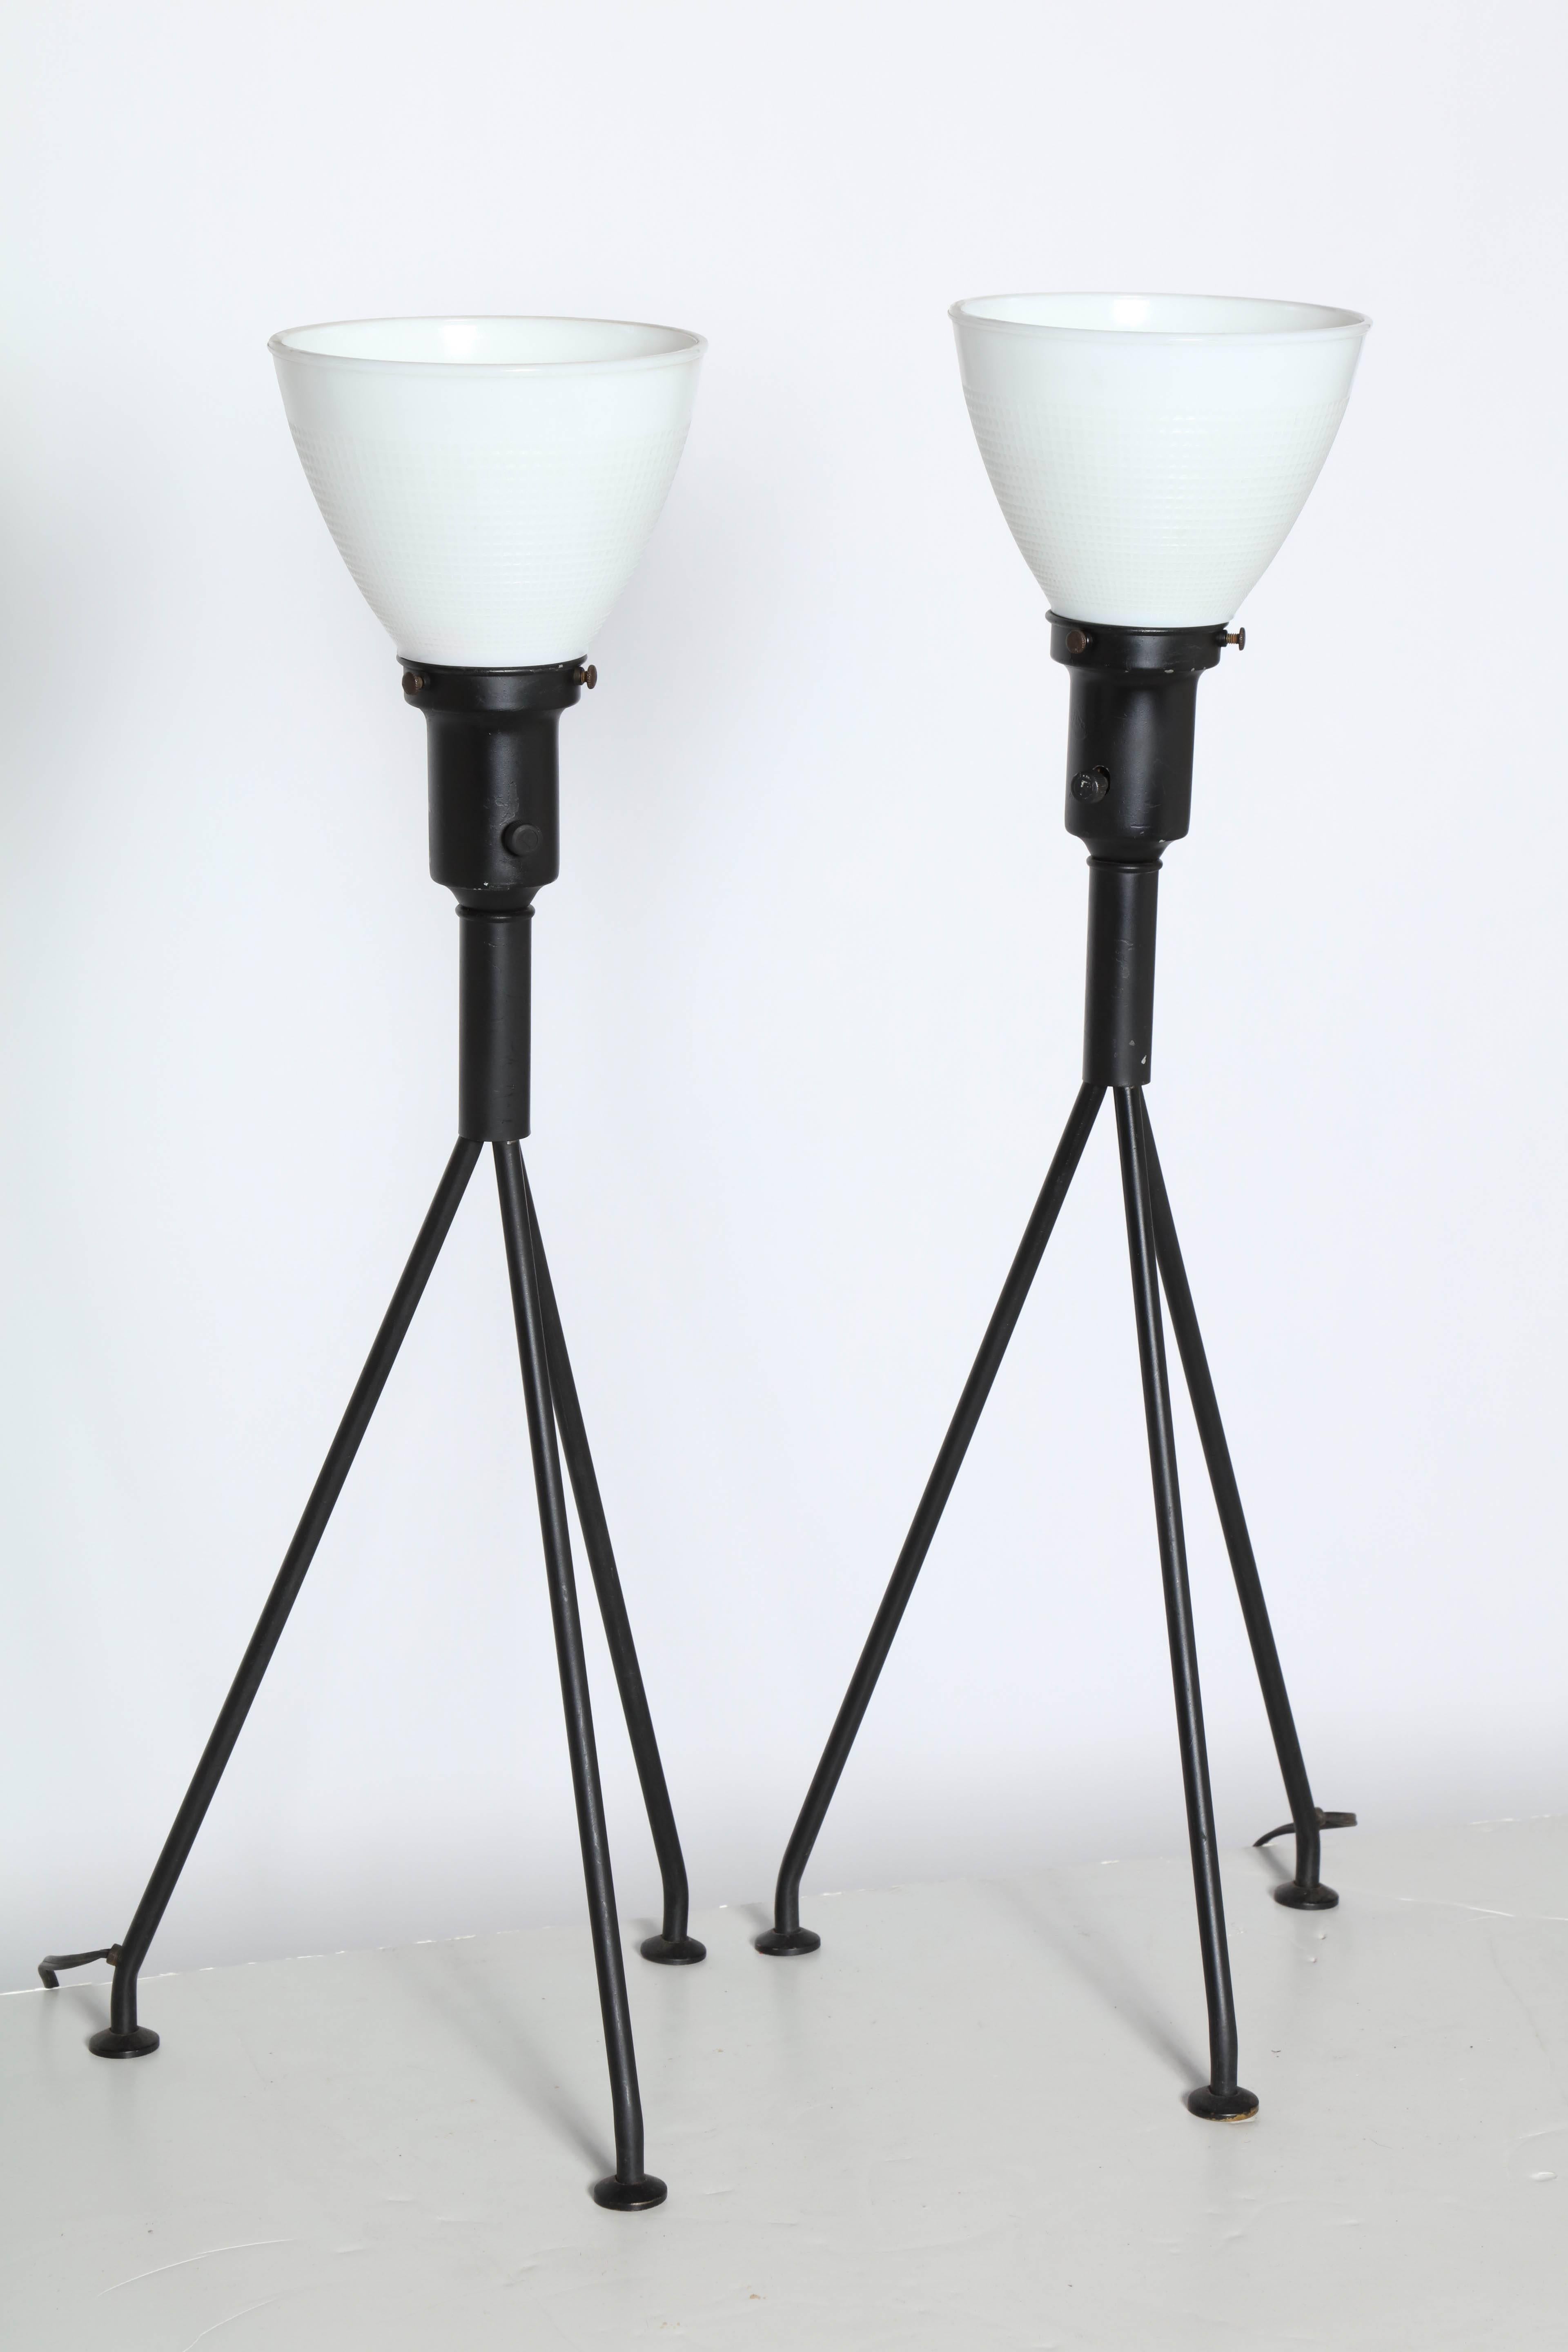 Pair Gerald Thurston Black Iron Tripod Table Lamps with Milk Glass Shades In Good Condition For Sale In Bainbridge, NY